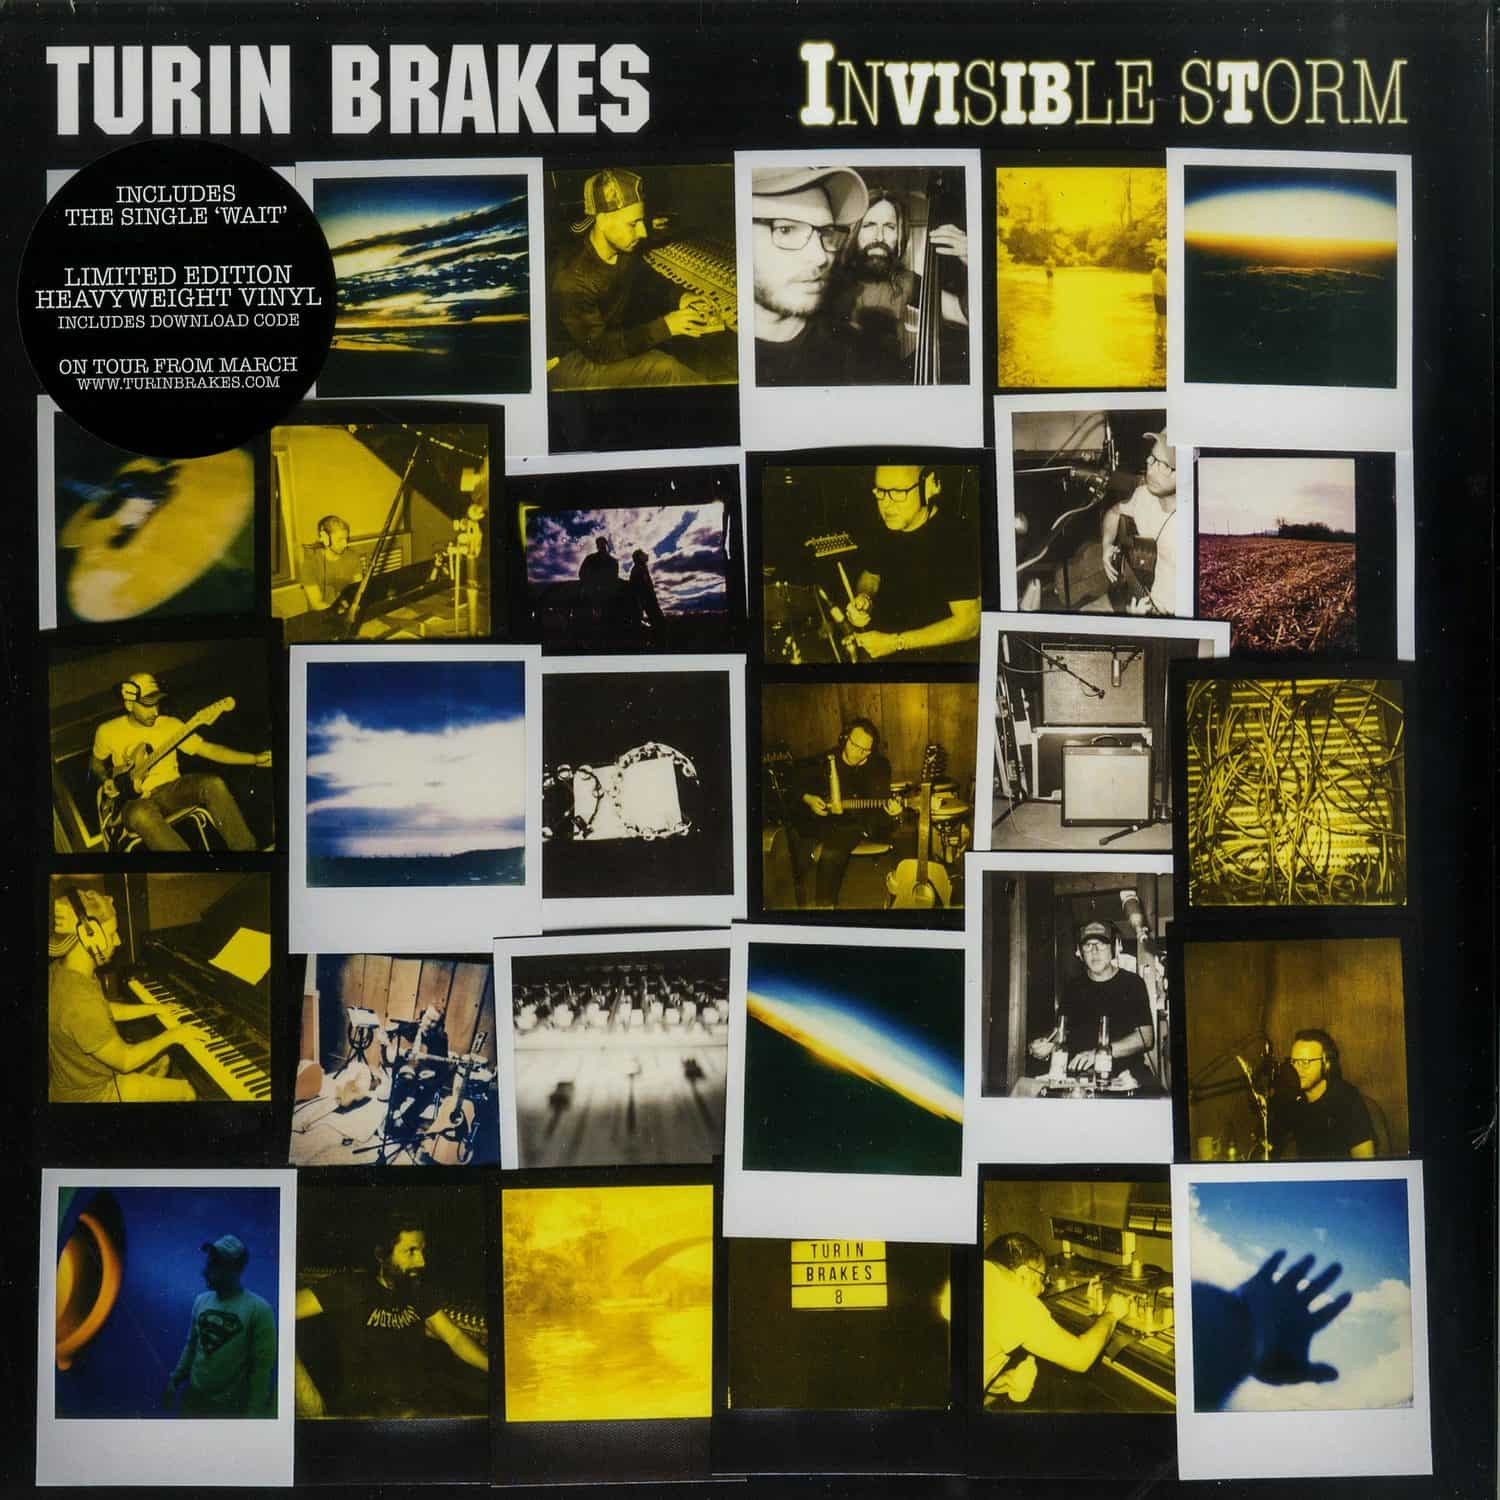 Turin Brakes - INVISIBLE STORM 